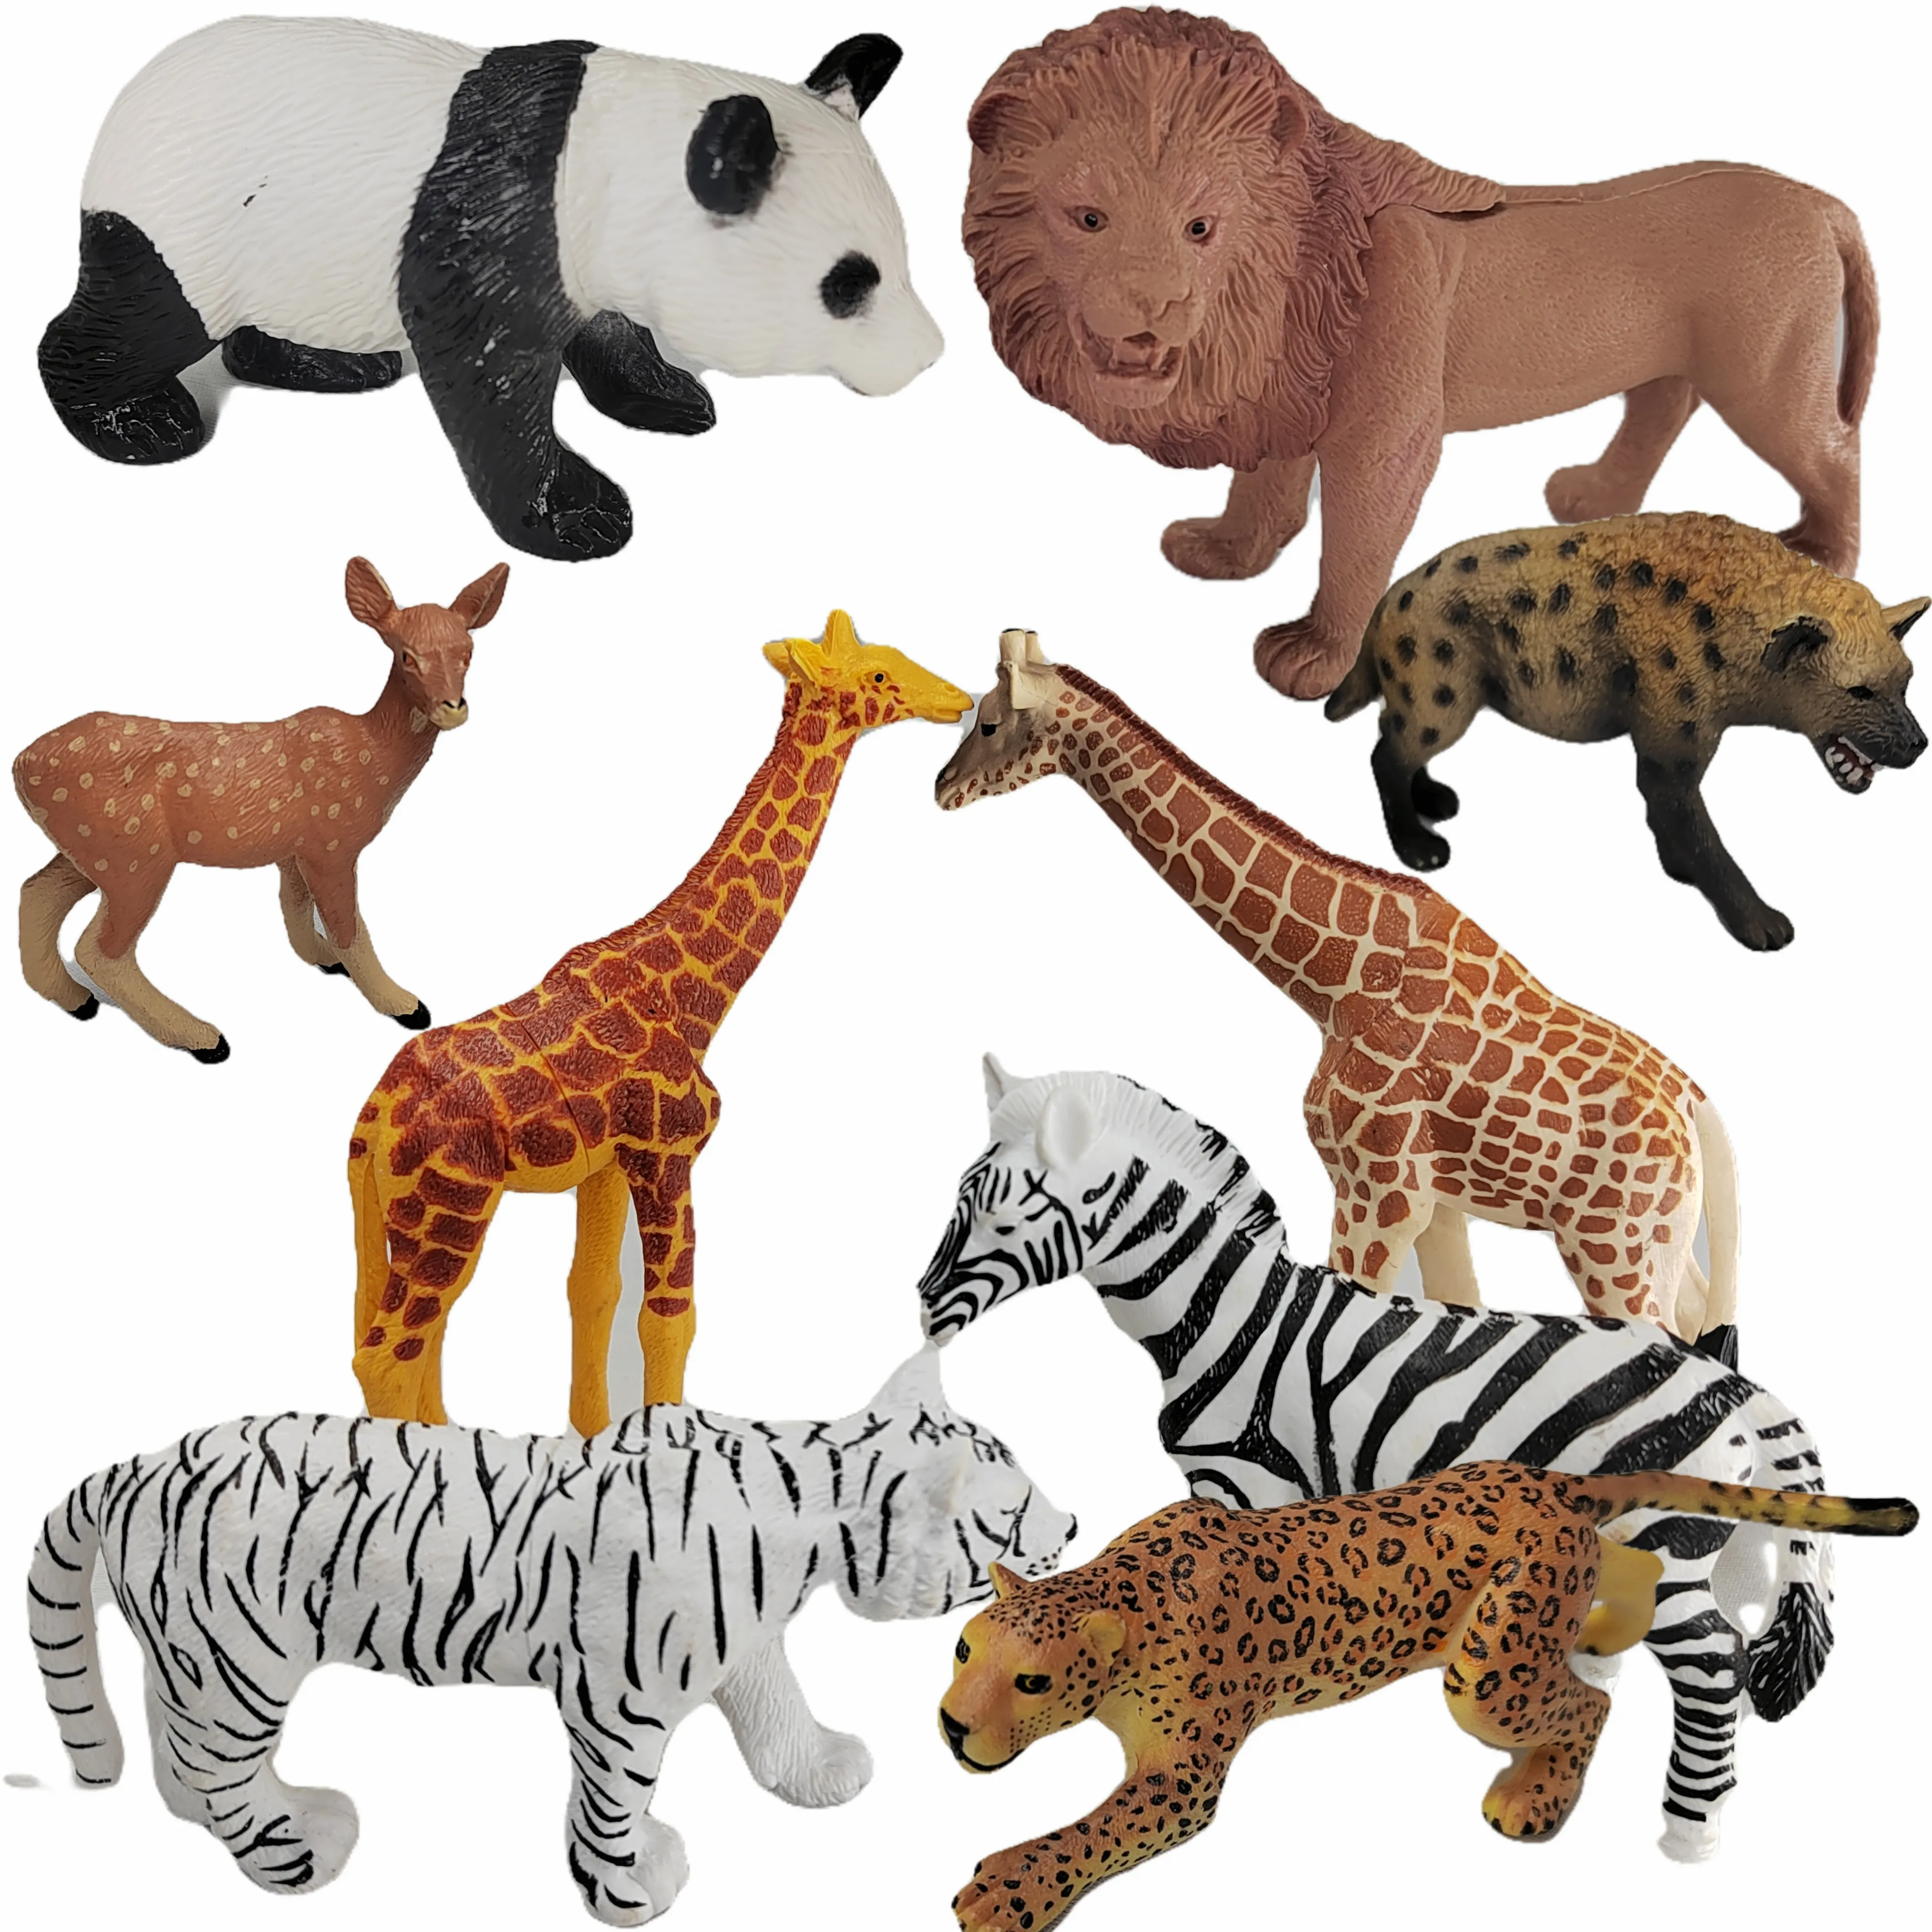 Simulation Wild Zoo Animal Chimpanzees Lion Tiger Horse Model Action Figures Bear Hippo Ostrich Rhino Figurines